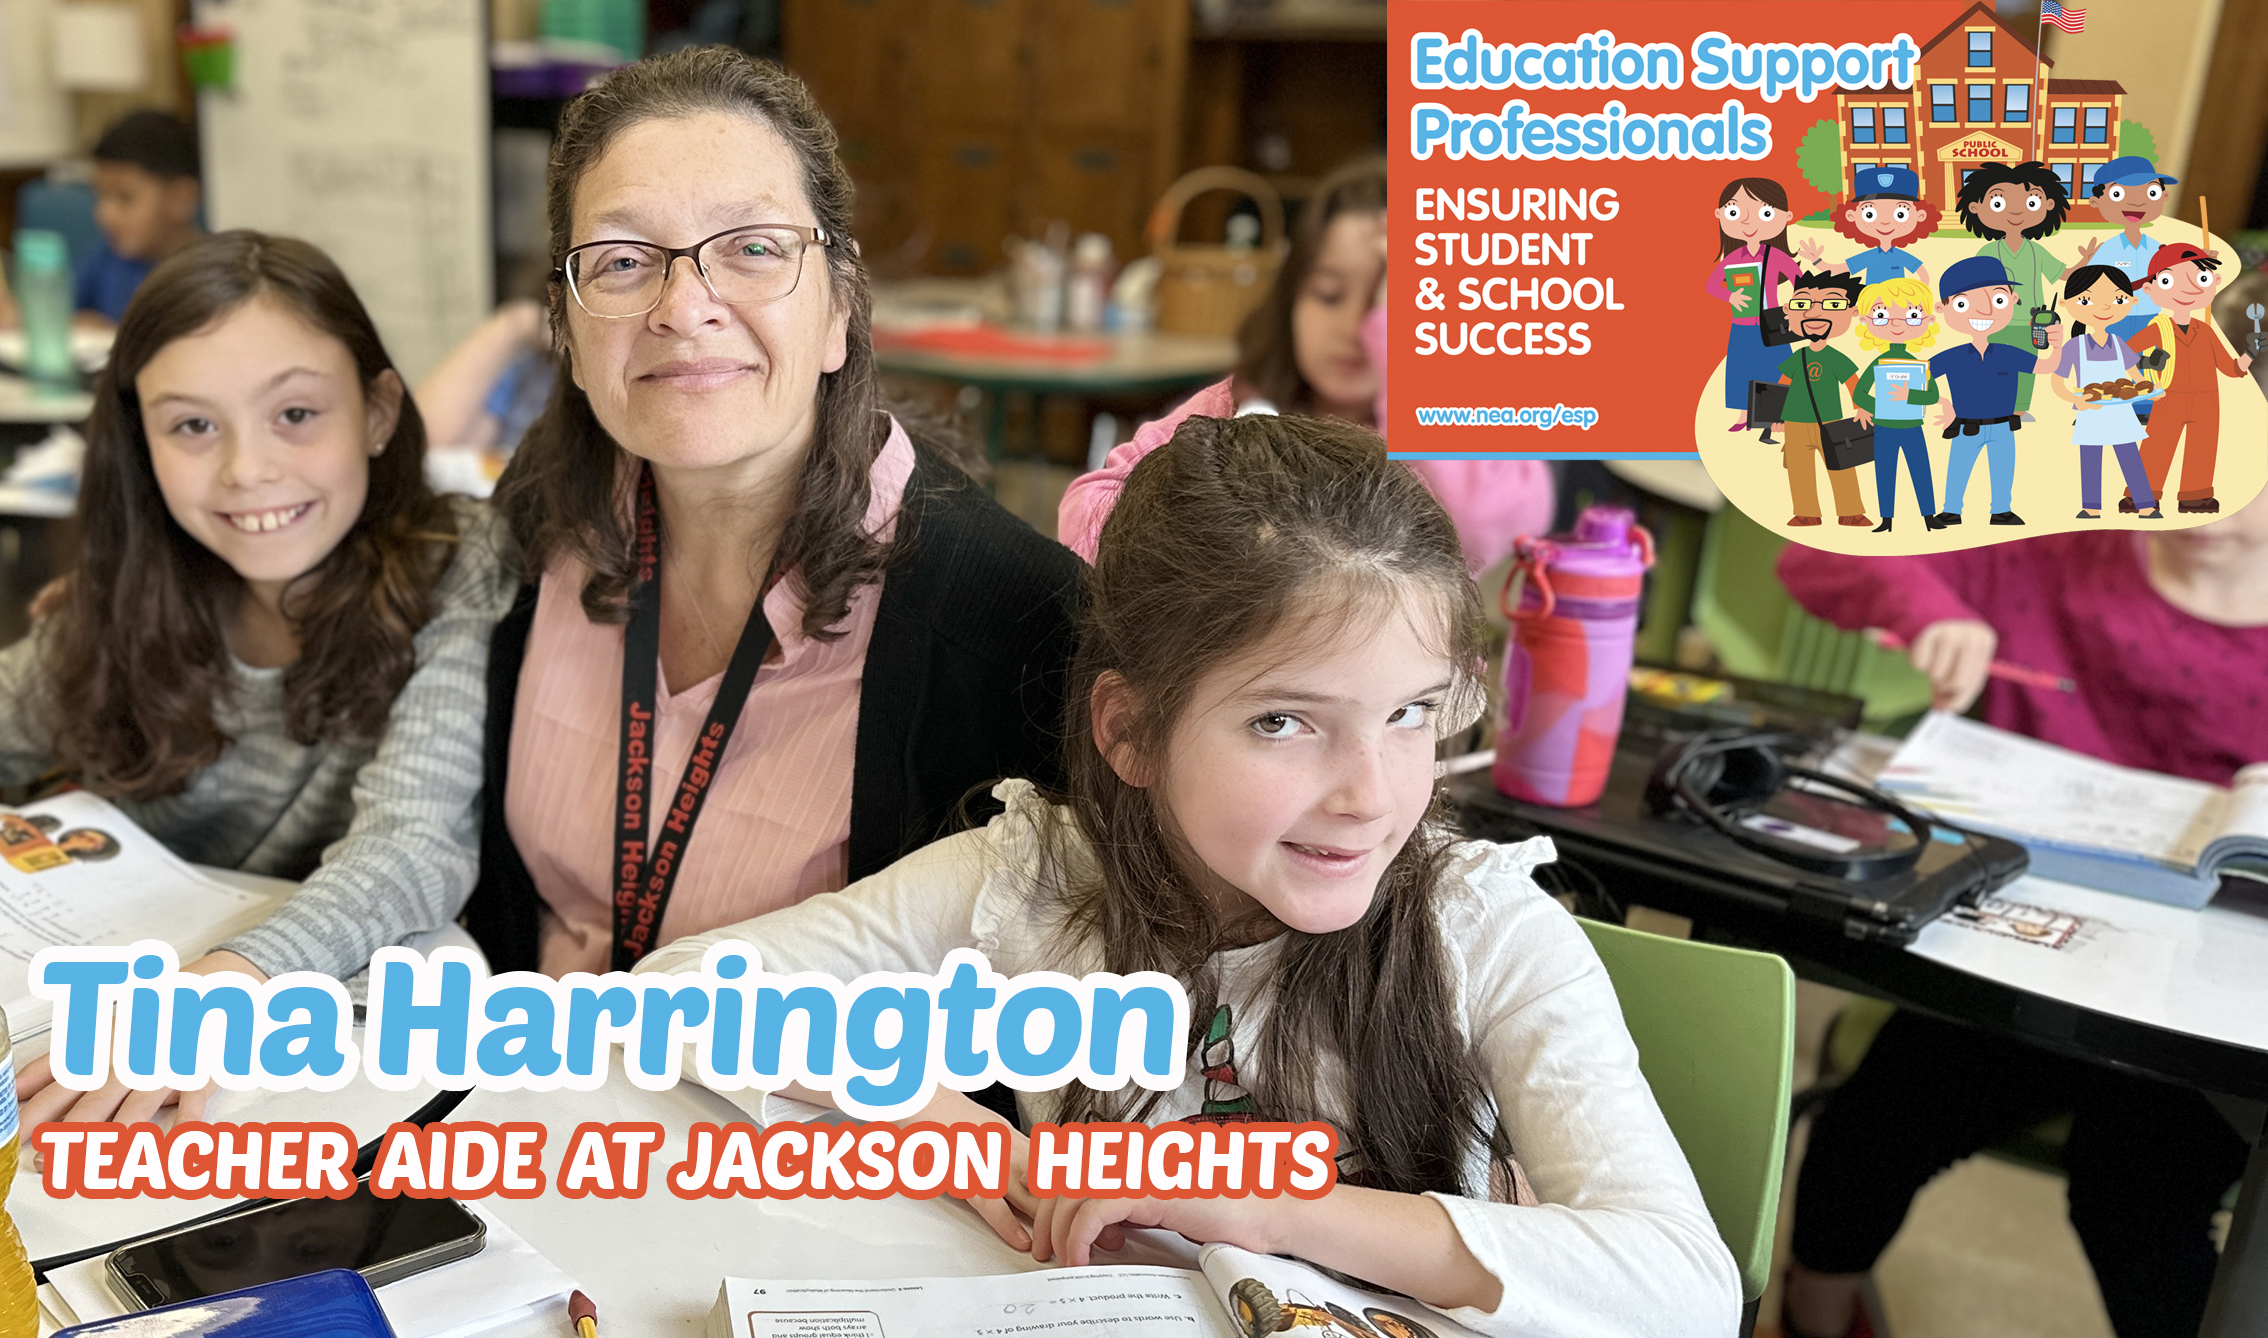 composite graphic of the logo for Education Support Professionals week on top of a picture of a teacher aide with two students working in math workbooks at their desks, smiling